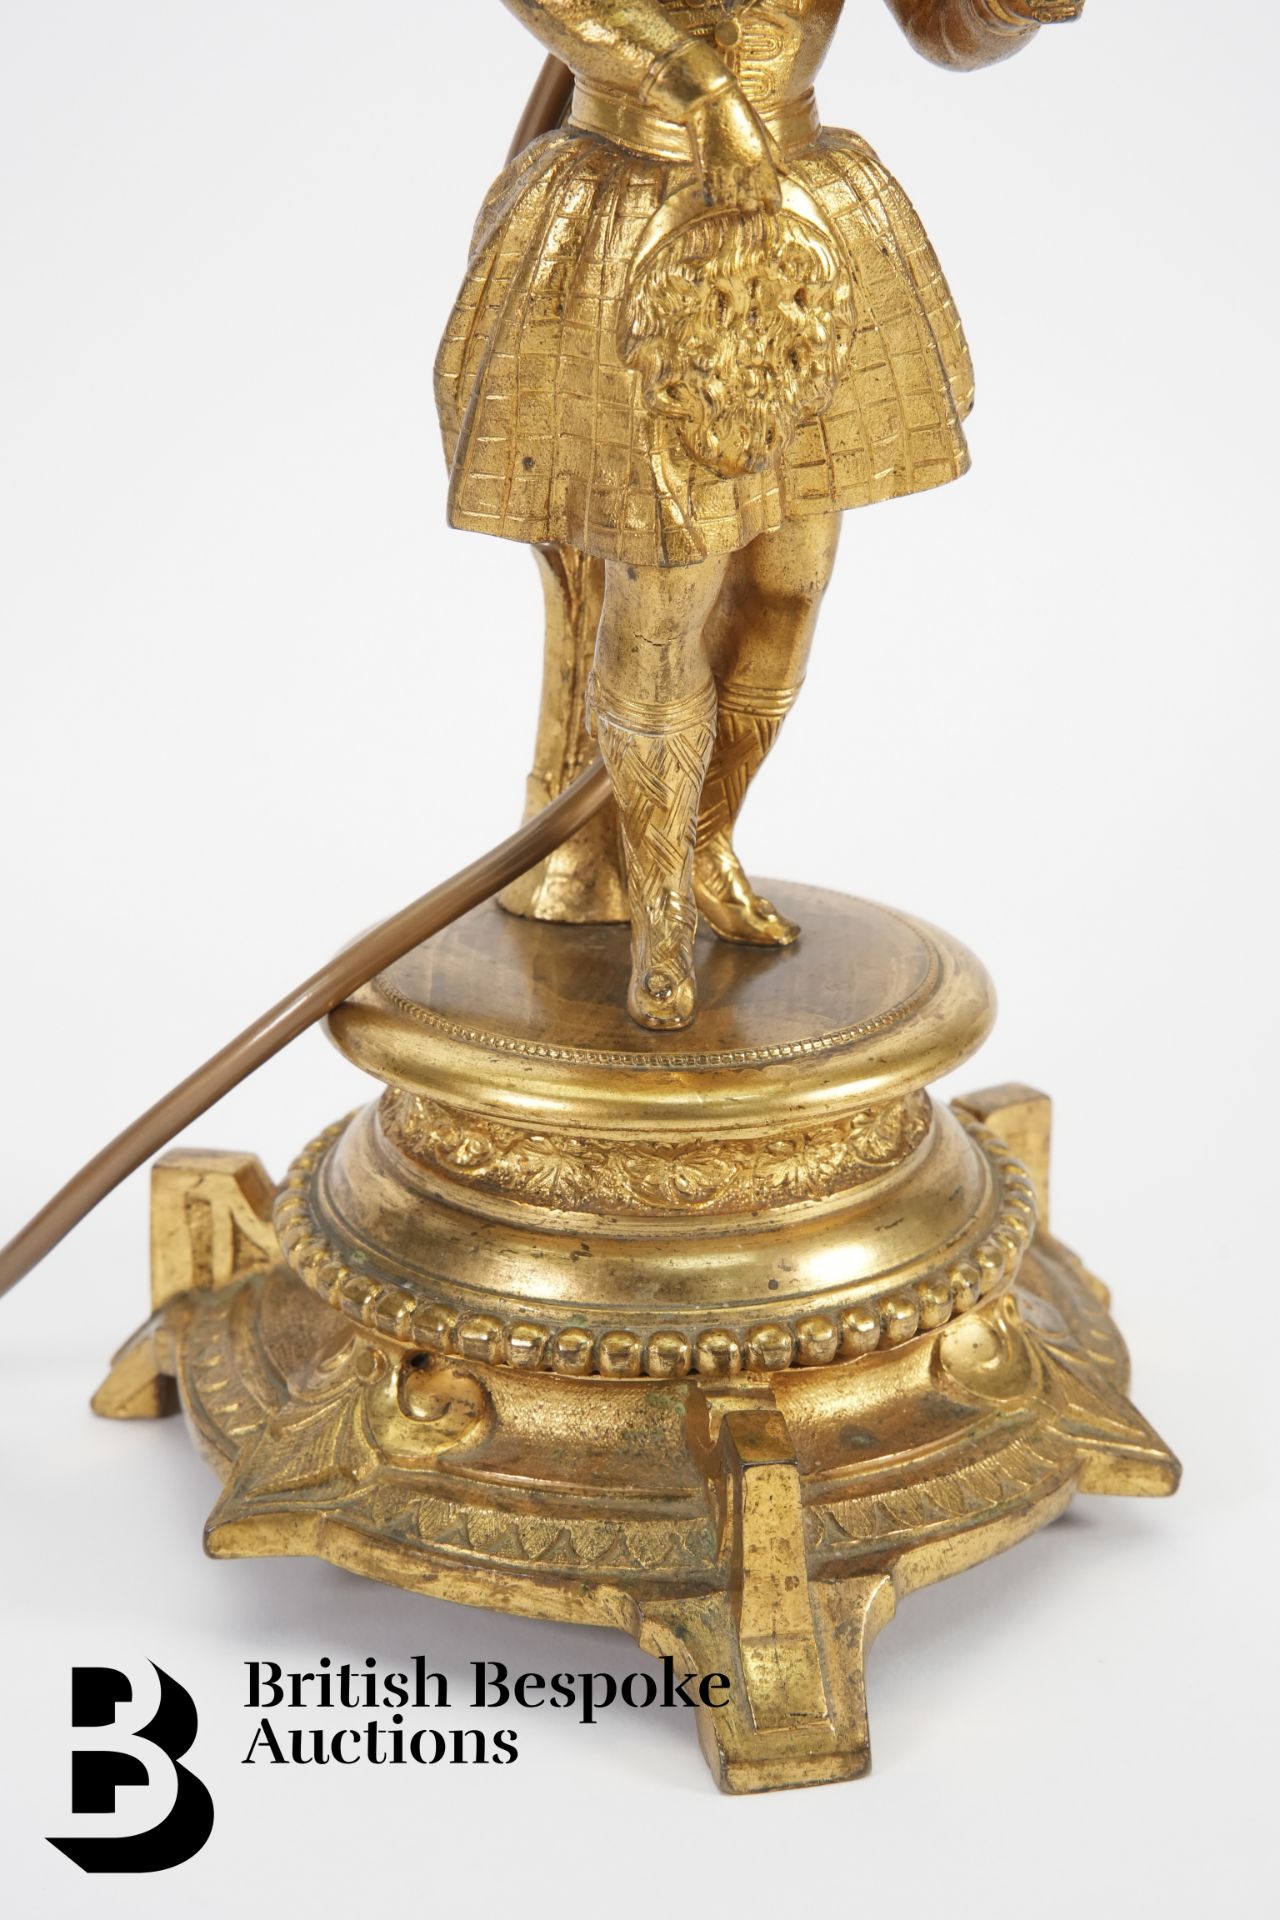 19th Century Gilt Metal Lamp Stand - Image 3 of 5